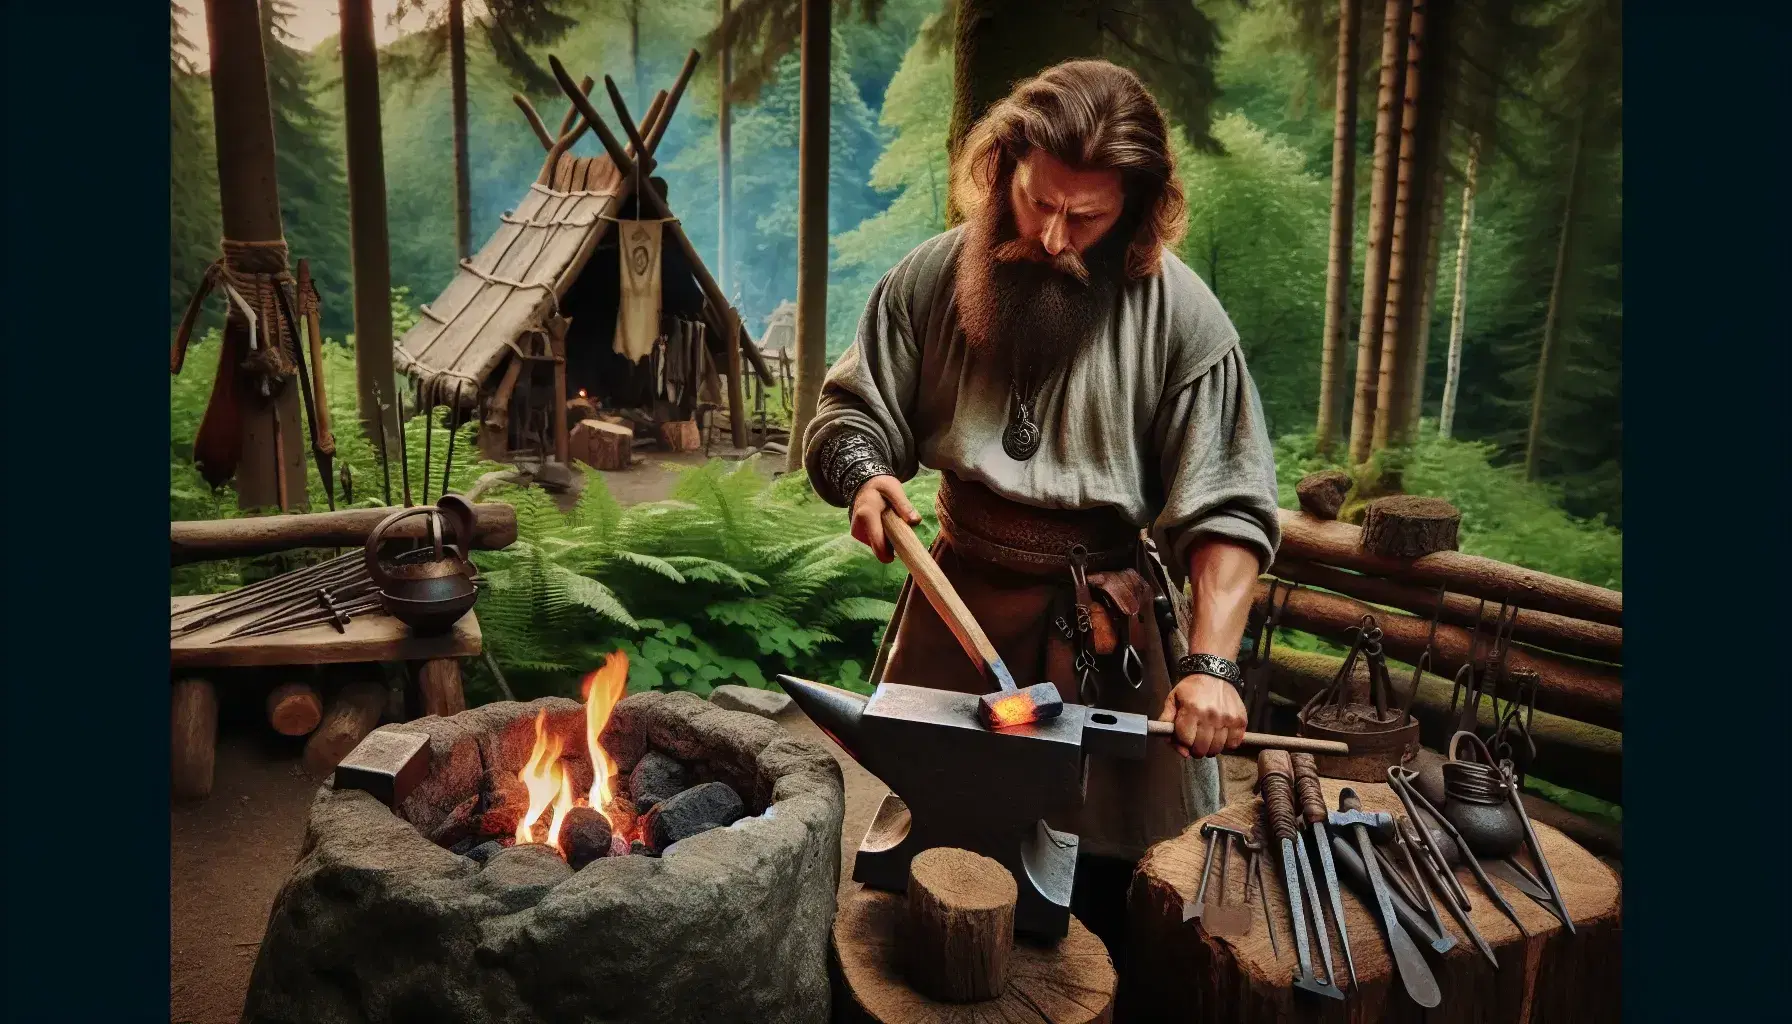 Viking-era blacksmith works in a forest forge, using tongs on hot metal by a charcoal fire, with an anvil, tools, and a bellows nearby, under a canopy of green foliage.